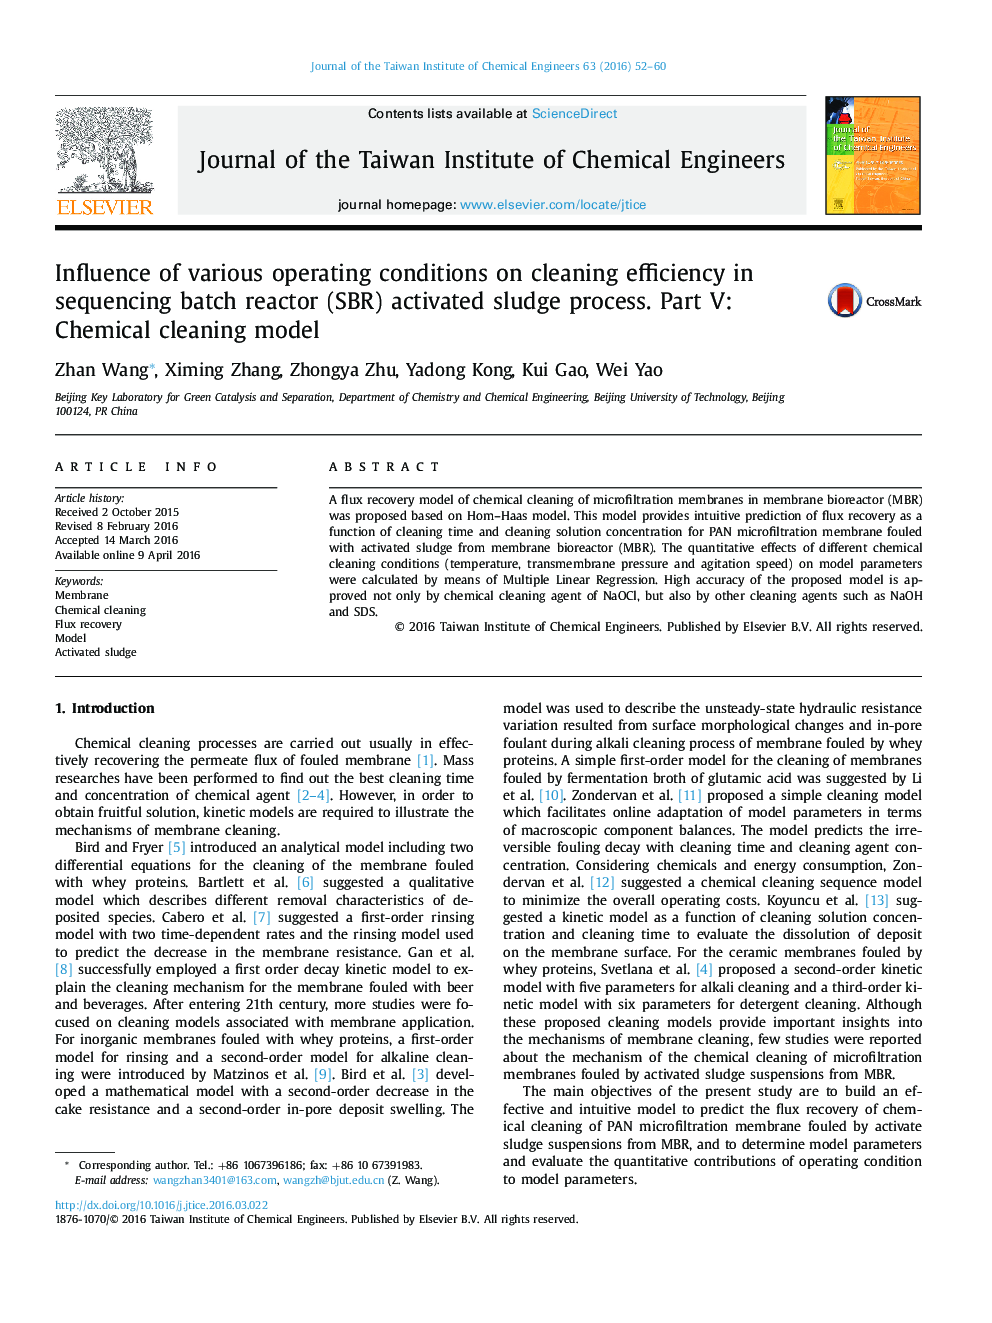 Influence of various operating conditions on cleaning efficiency in sequencing batch reactor (SBR) activated sludge process. Part V: Chemical cleaning model